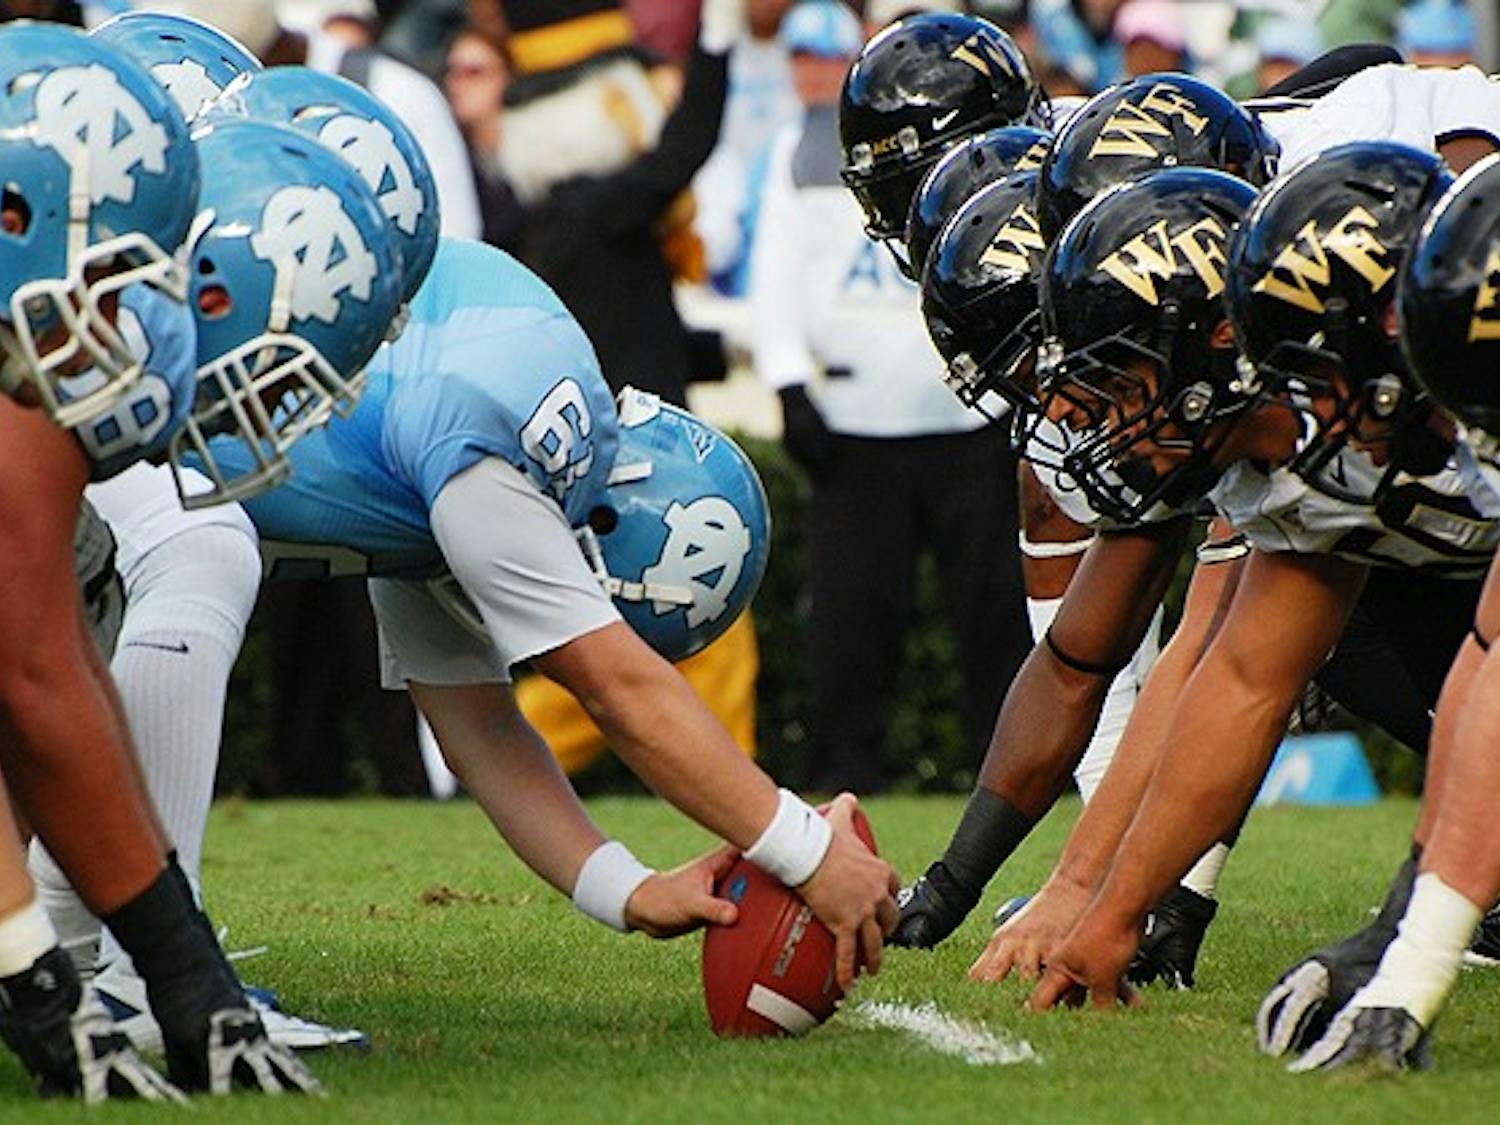 UNC football homecoming game vs. Wake Forest